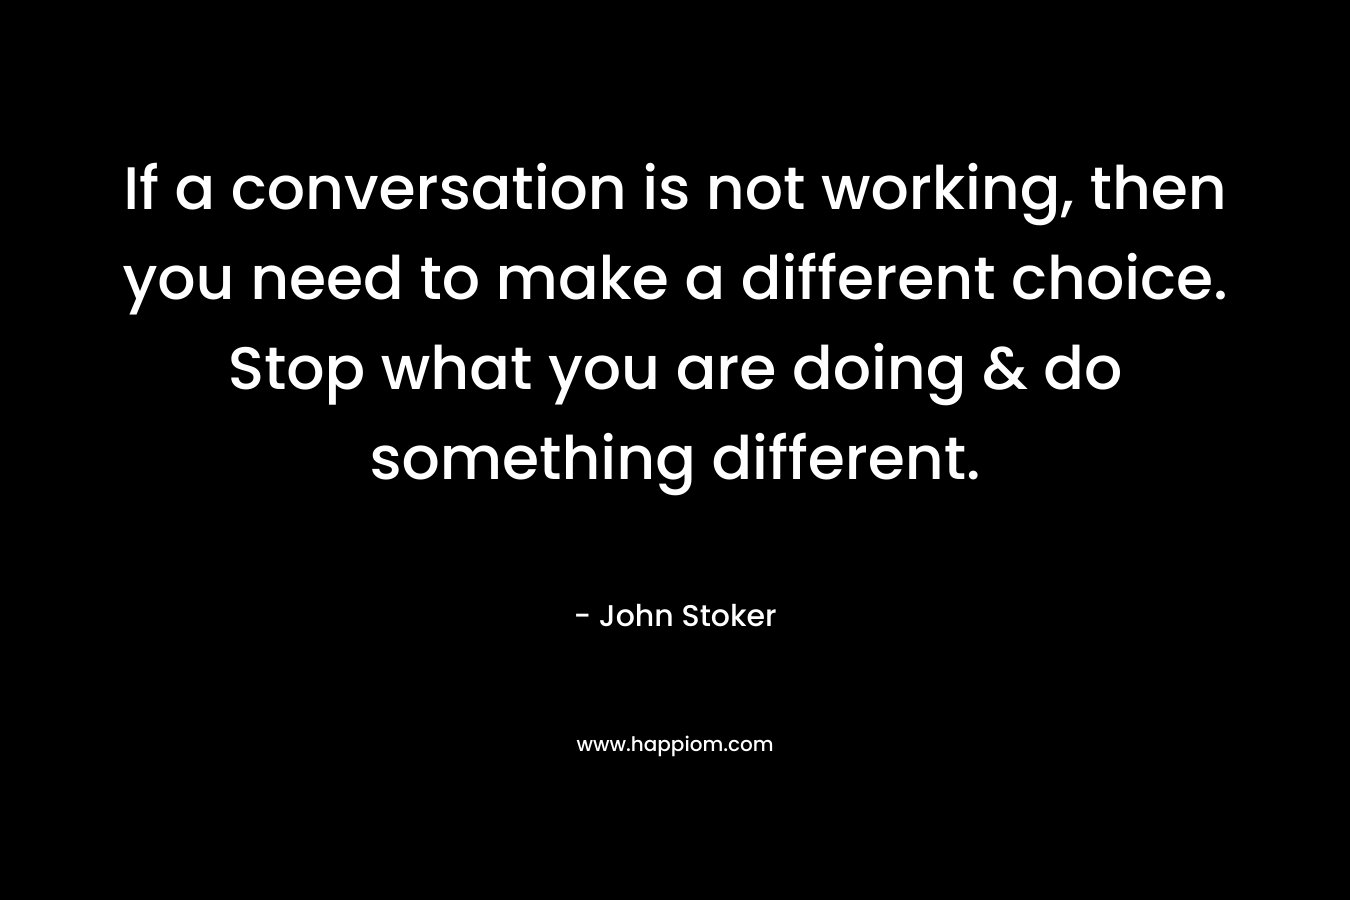 If a conversation is not working, then you need to make a different choice. Stop what you are doing & do something different.